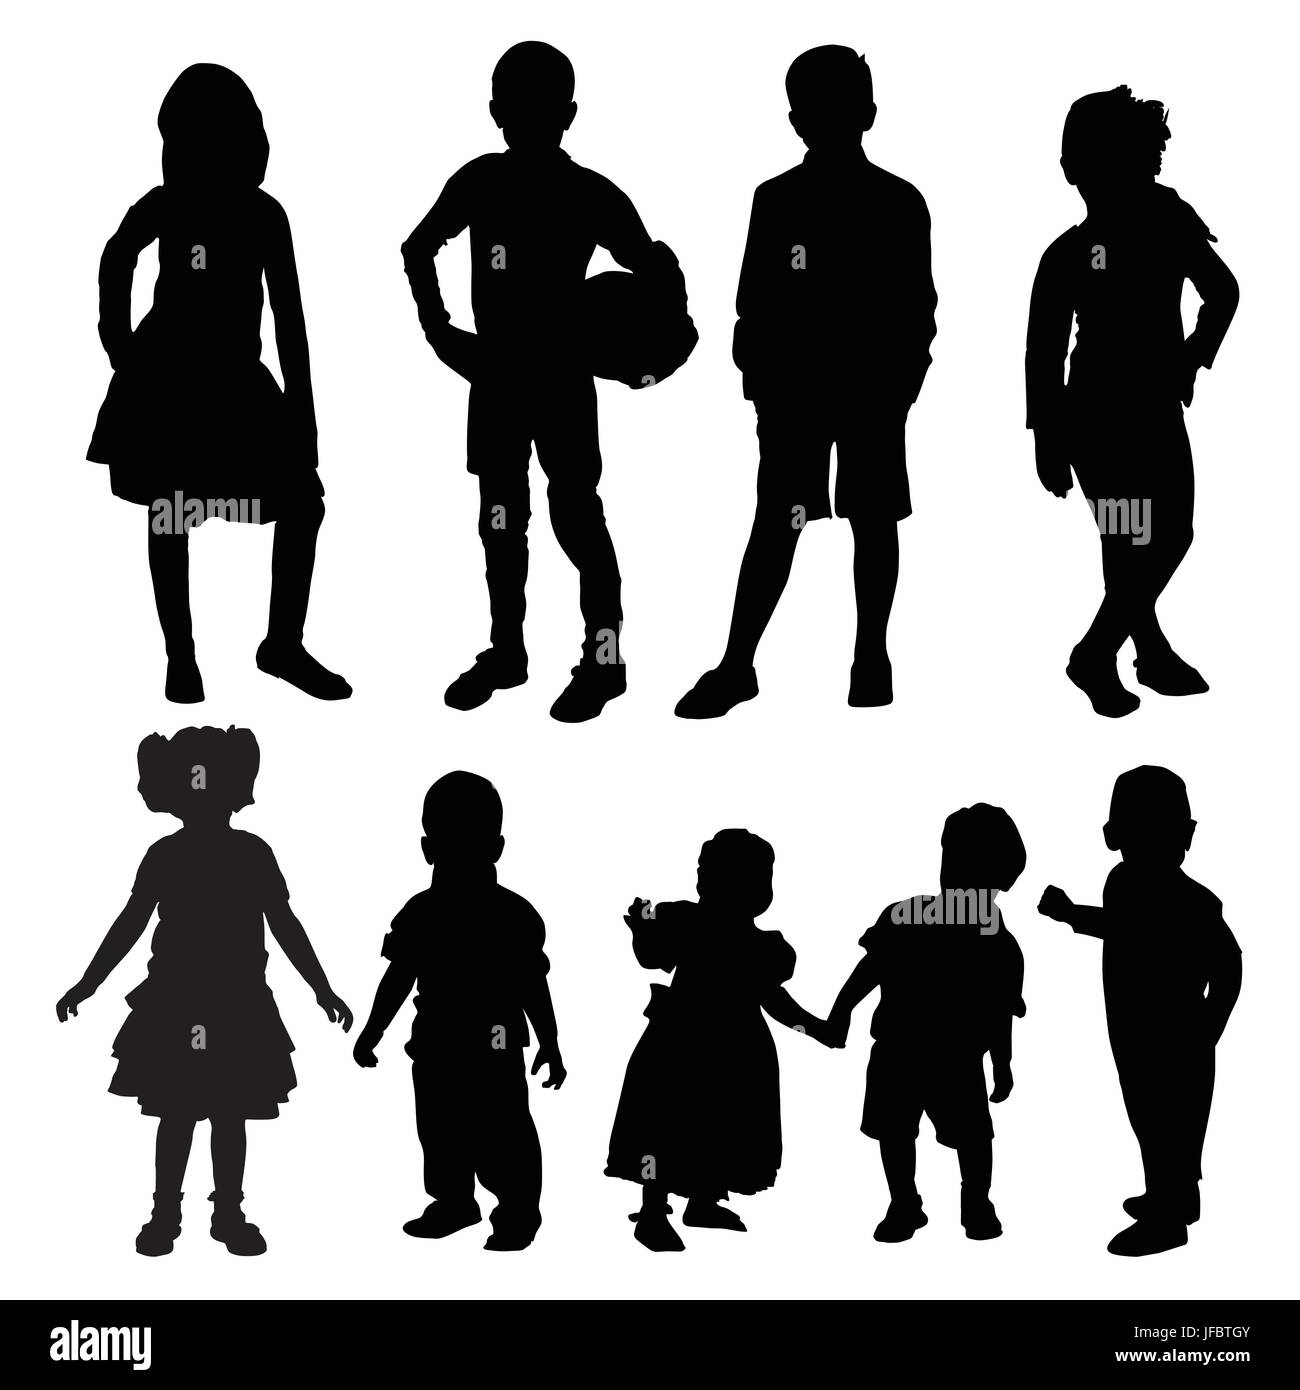 Child silhouette Stock Vector Images - Alamy